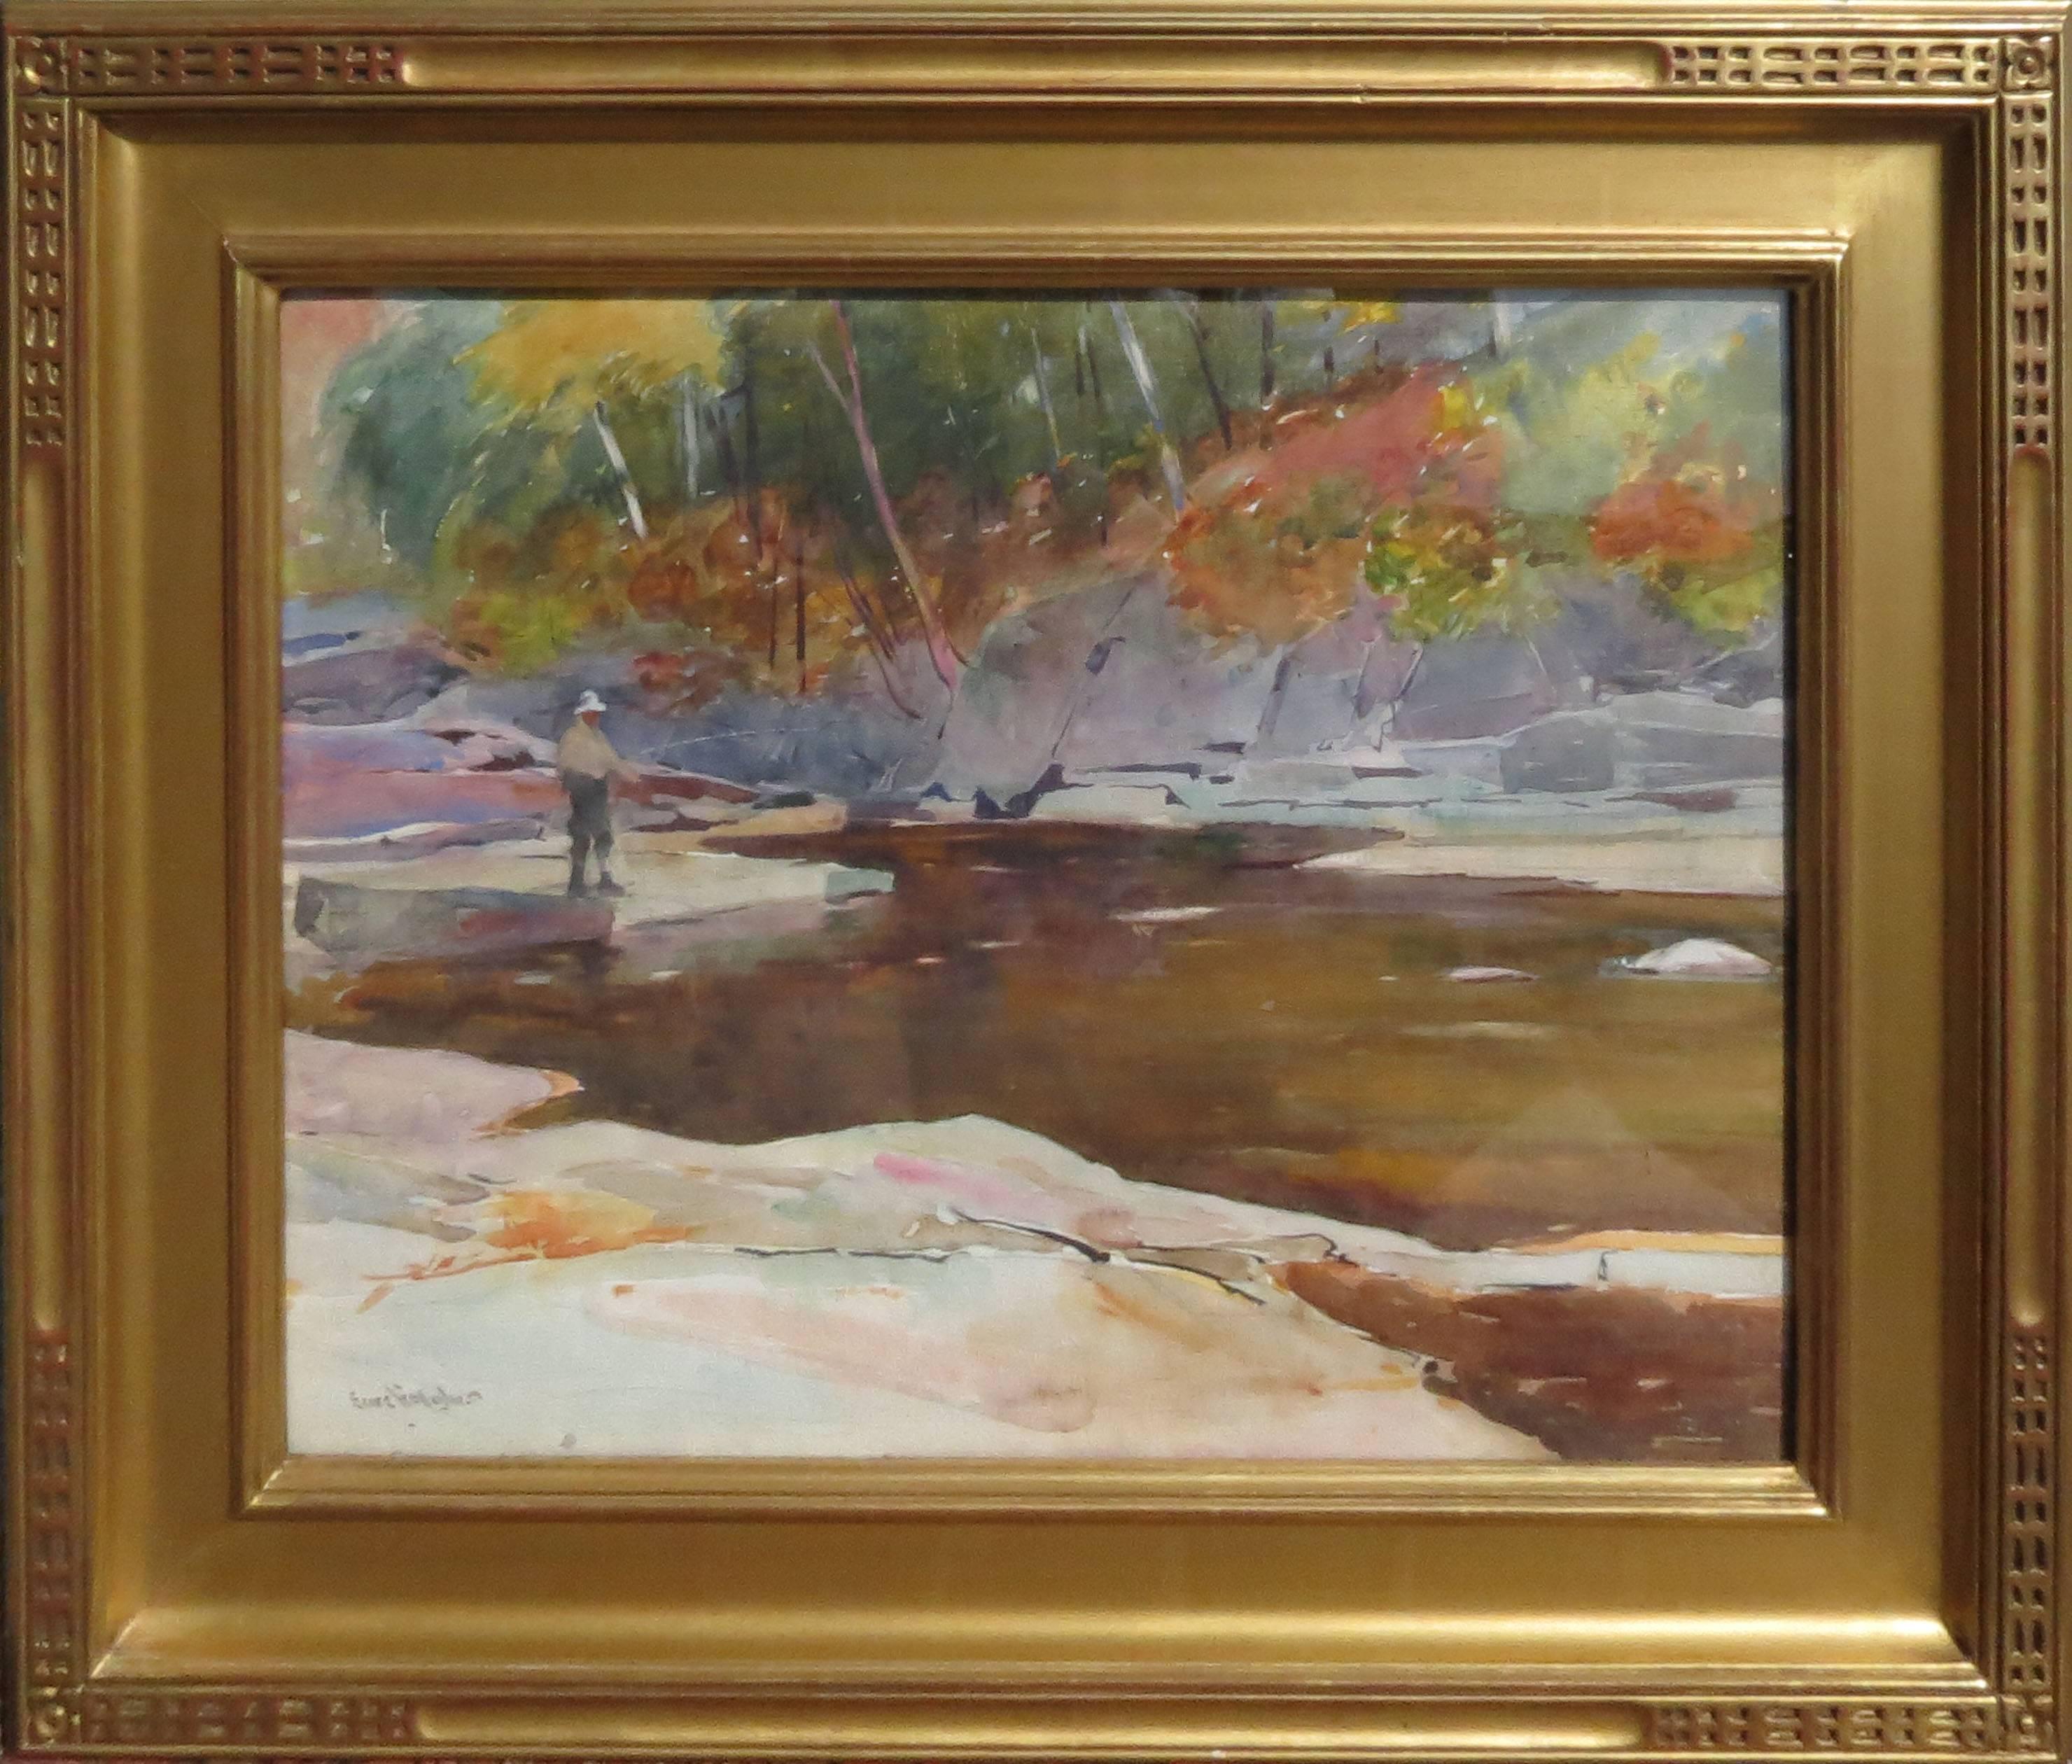 Landscape Art Sears Gallagher - "Fishing, New Hampshire"